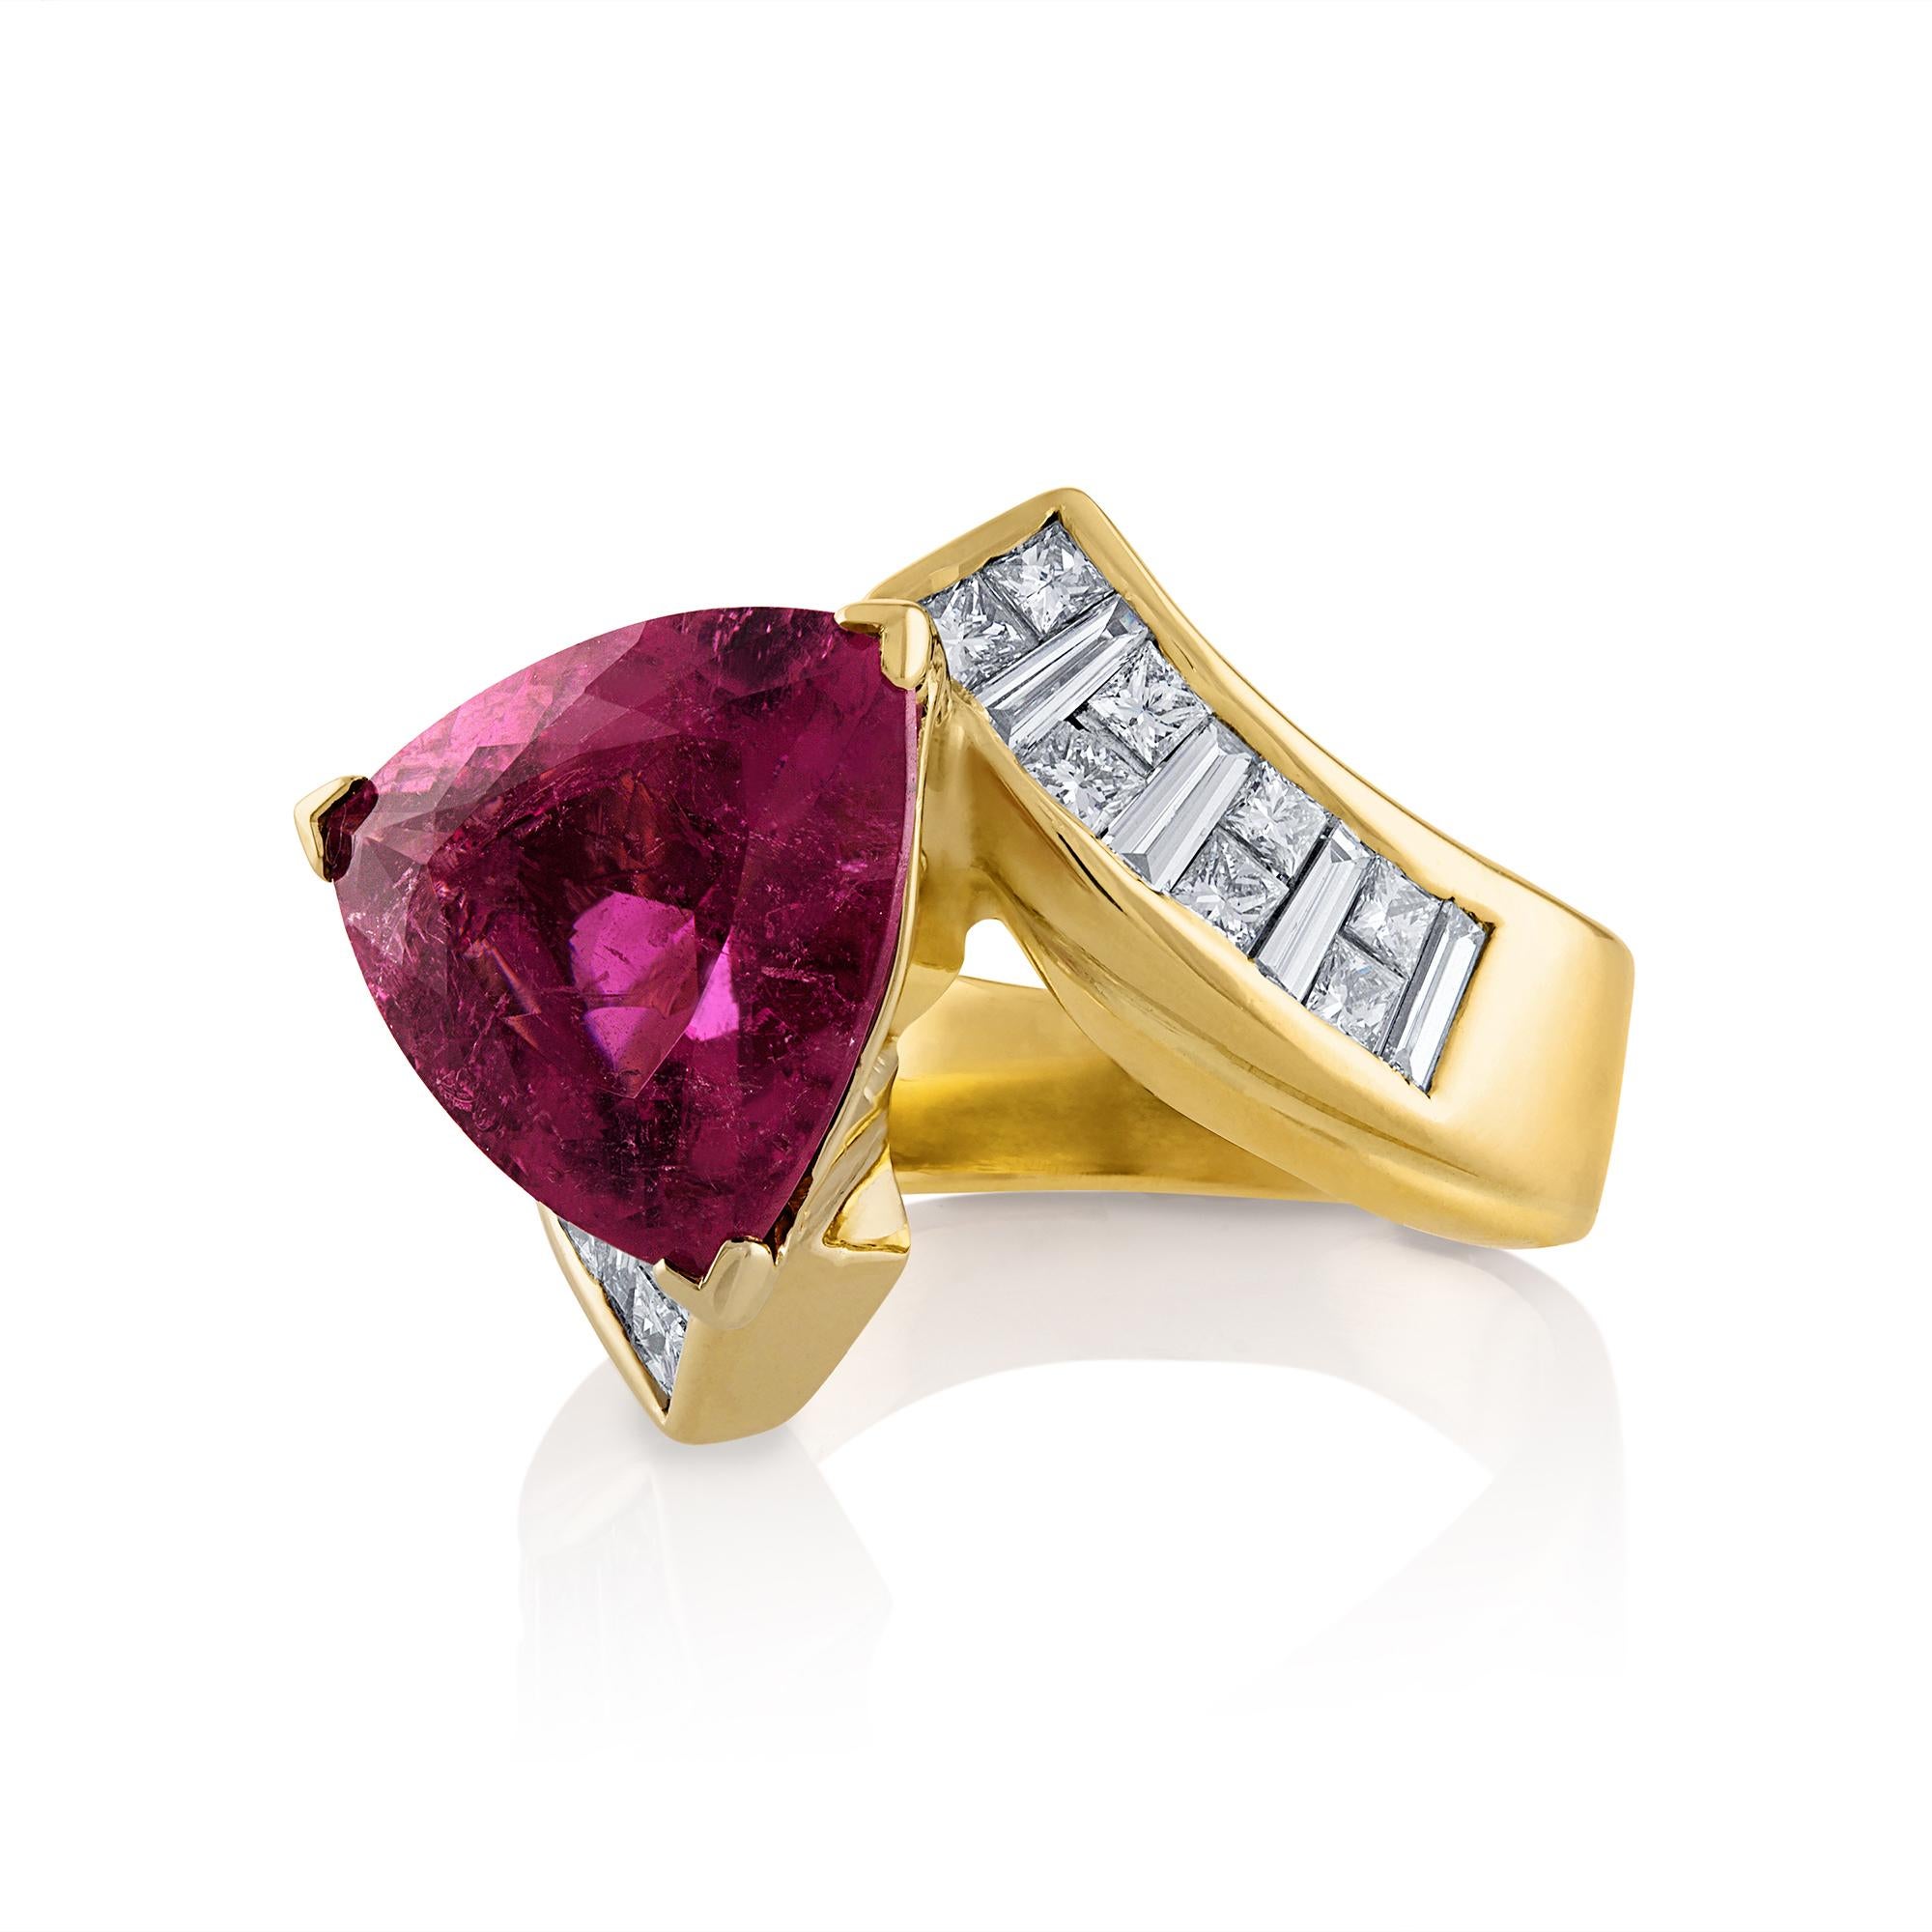 Make a sparkling statement with this unique and impressive Mid-20th Century 18k Gold RUBELLITE Tourmaline and Diamond Ring. 
The Rubellite is NATURAL, luscious 5.39ct r shape Triangular tourmaline in Bright Neon Glowing Purplish Pink color,